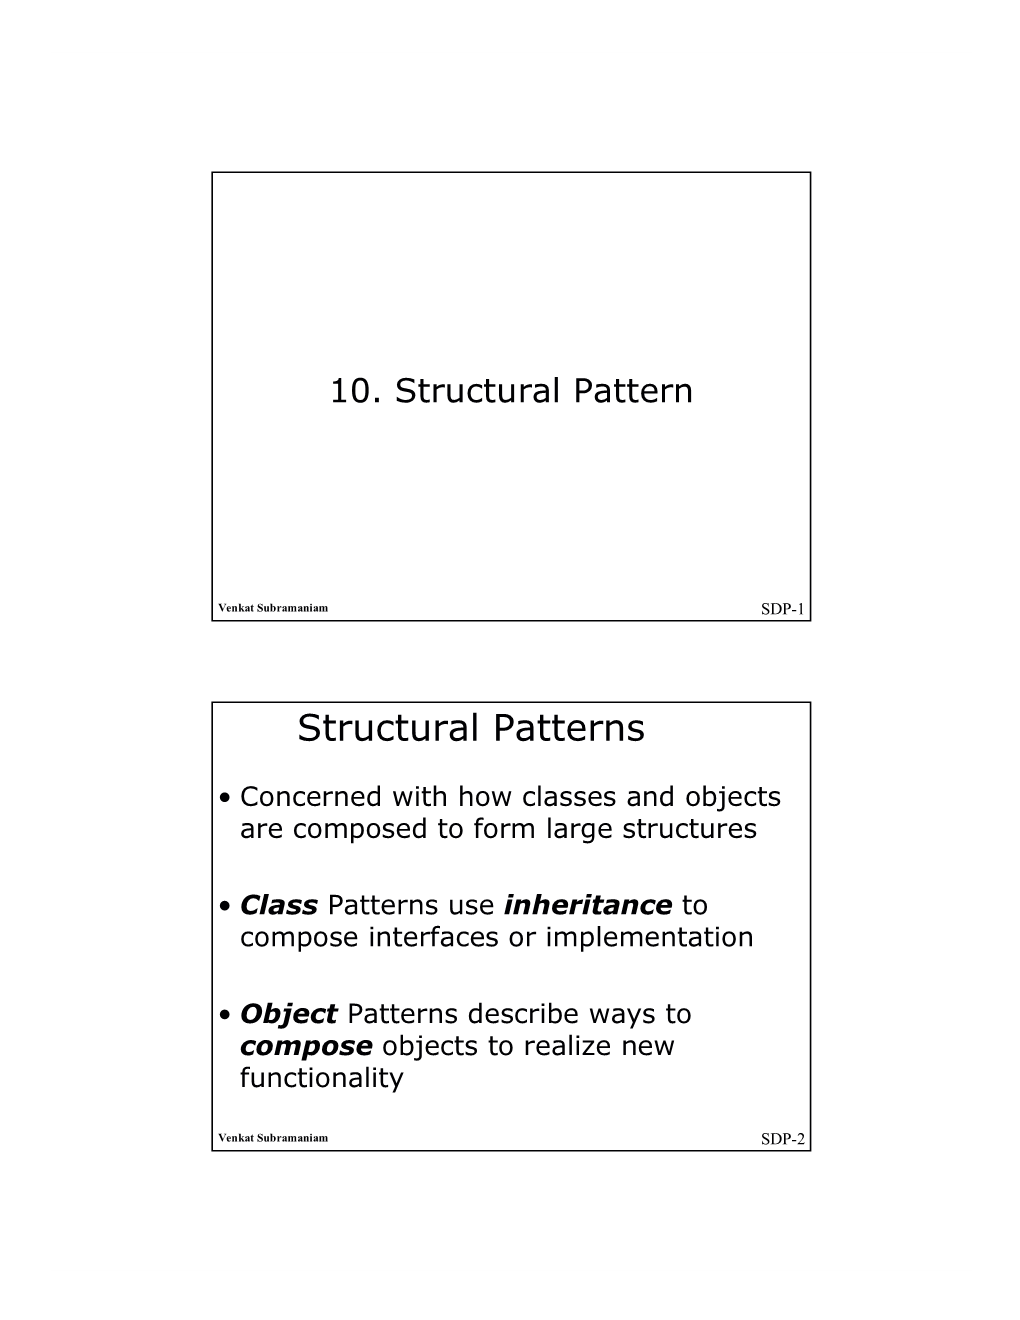 Structural Patterns